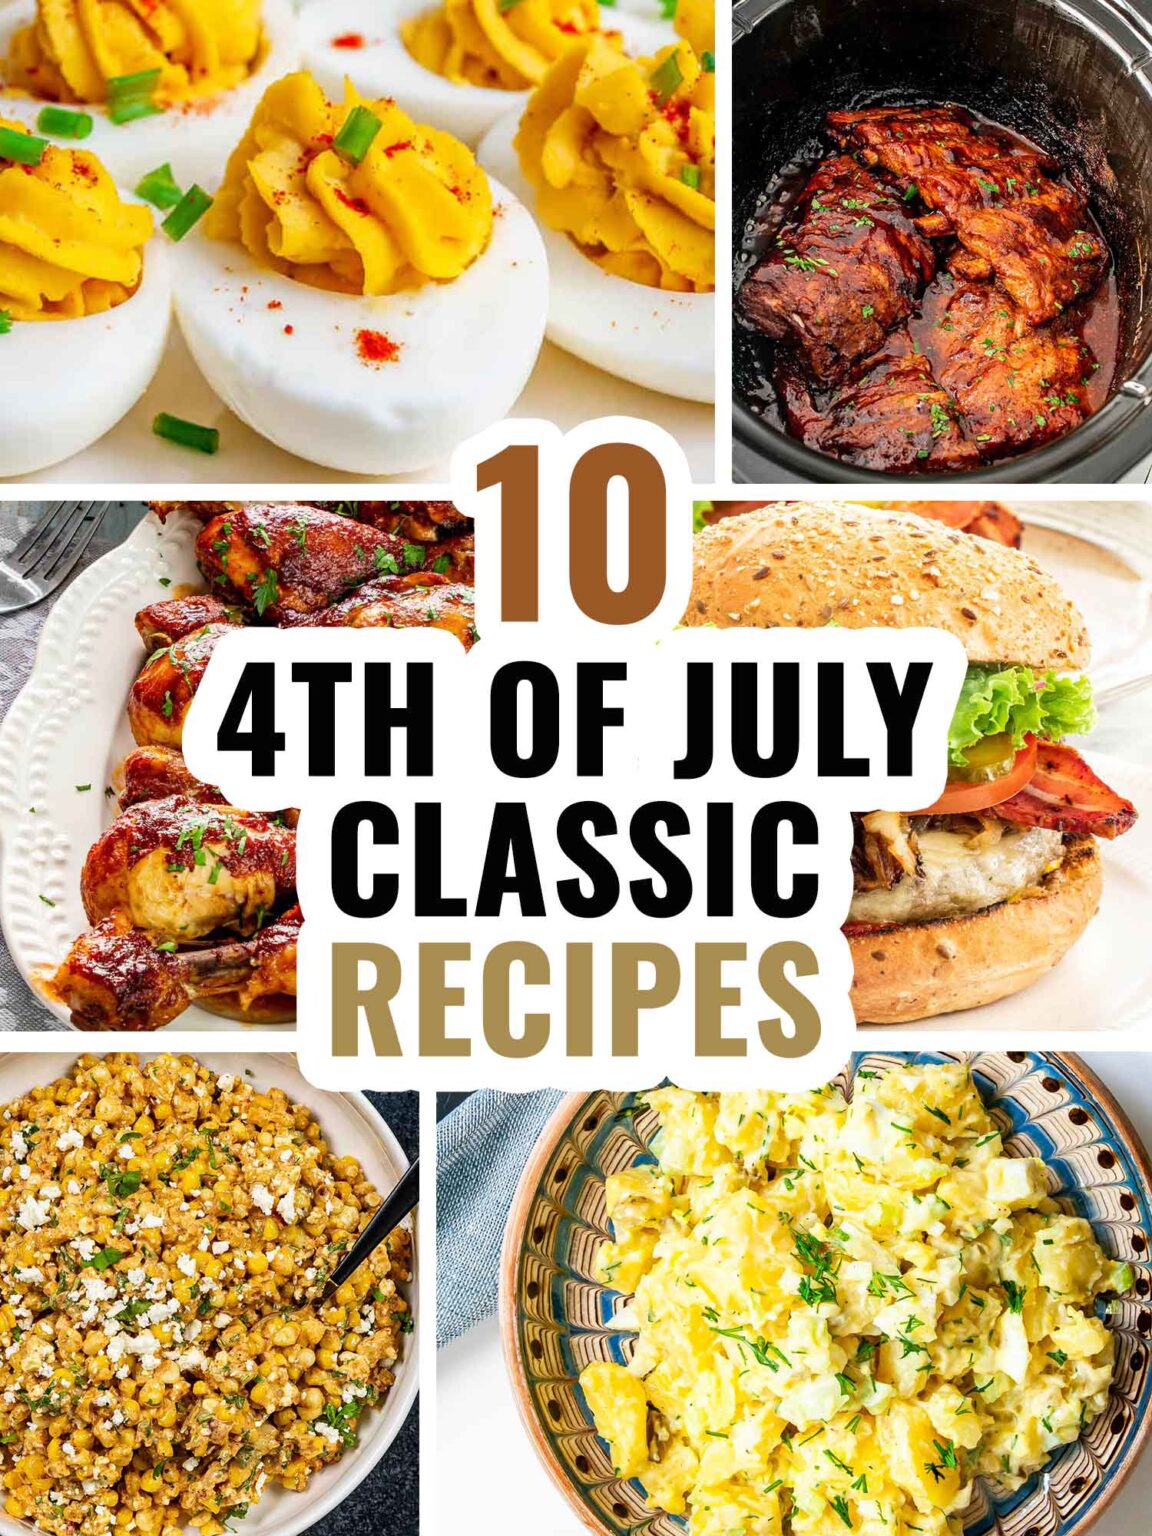 Fourth of July Feast: 10 Comfort Food Recipes - Craving Home Cooked